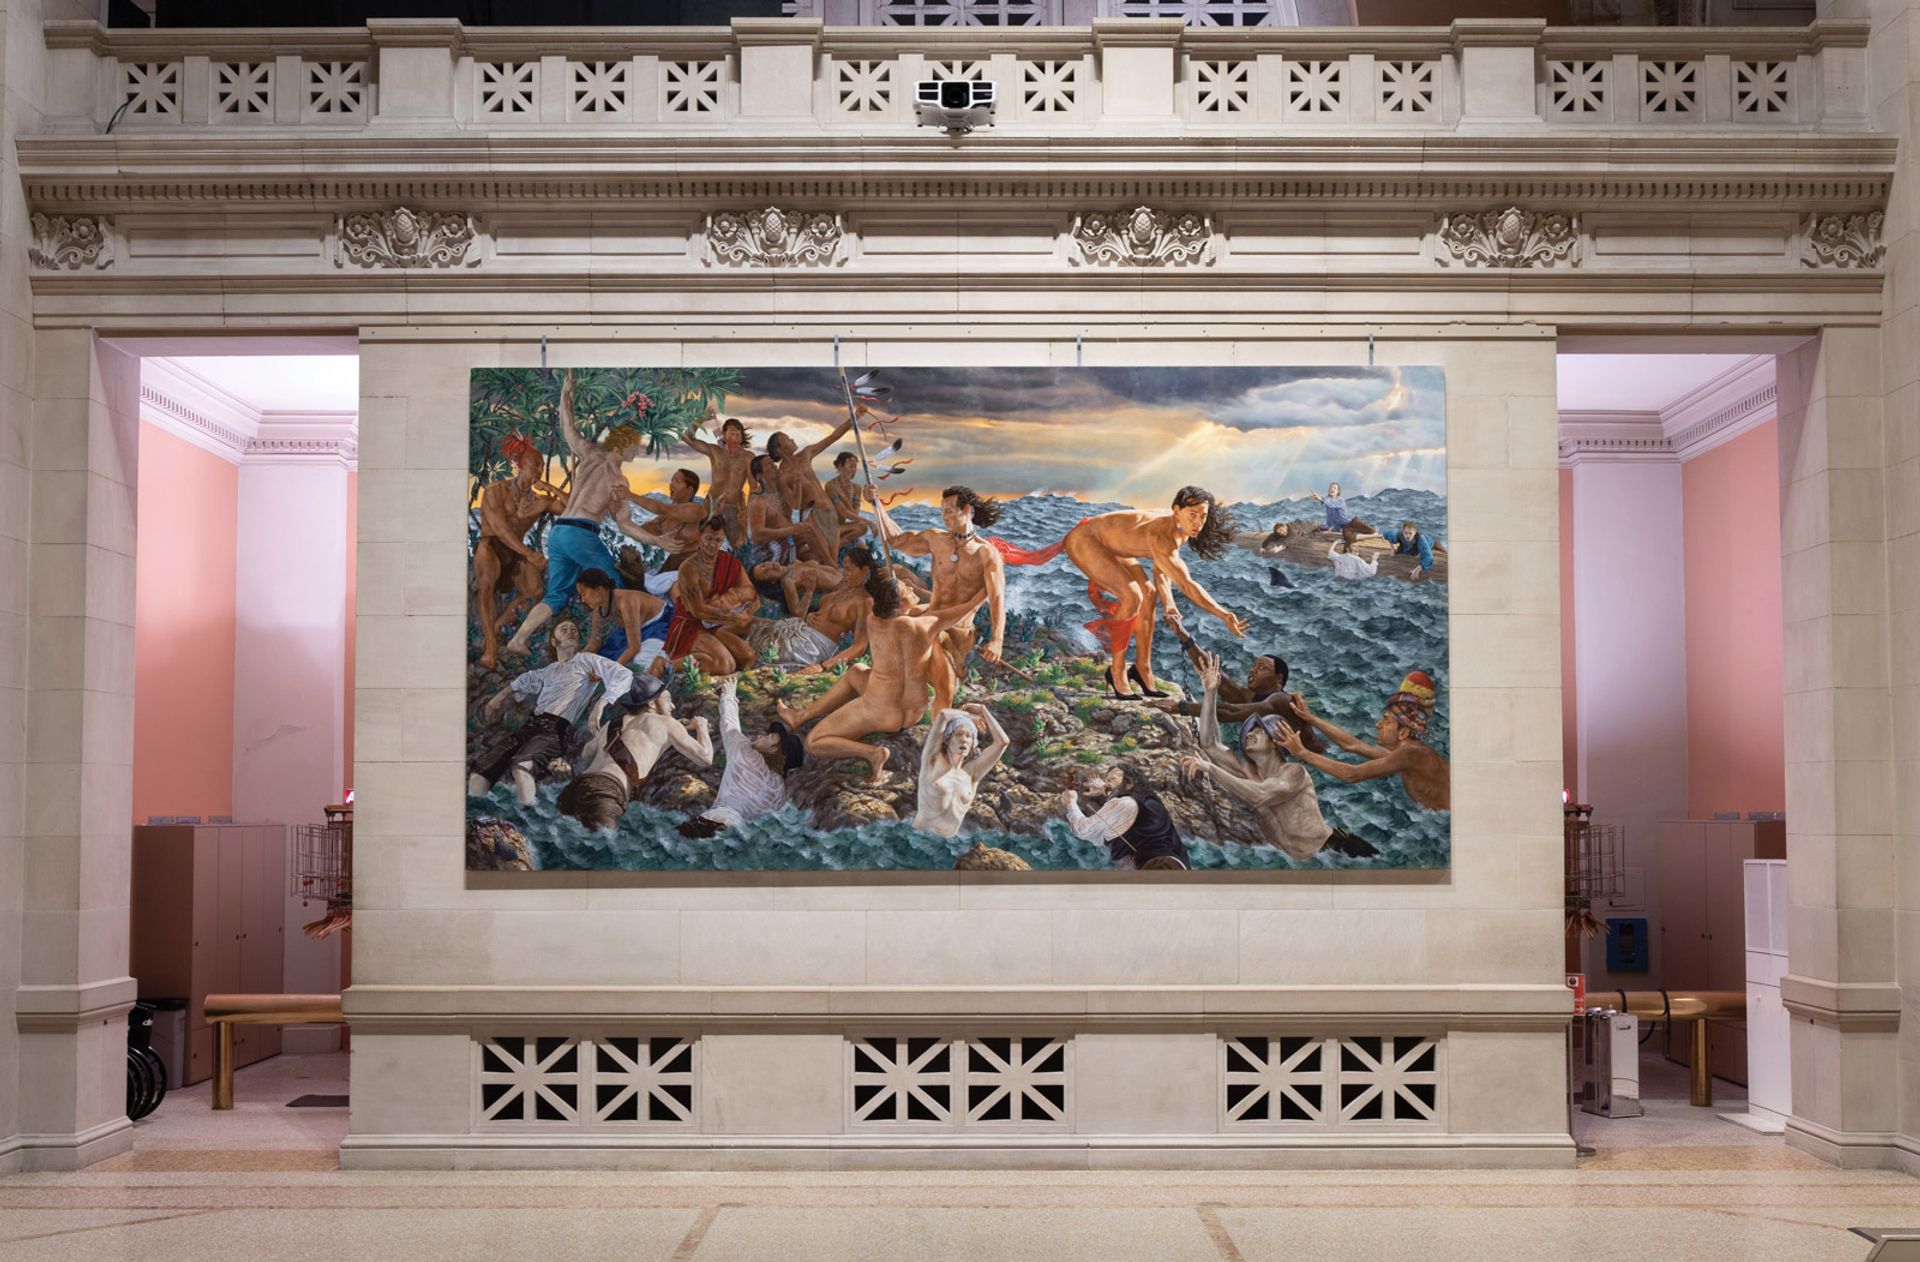 Shattering impact: Welcoming the Newcomers, one of two monumental paintings (each almost 11 feet by 22 feet) by Kent  Monkman in the Great Hall of the Metropolitan Museum, New York Photo by Anna-Marie Kellen